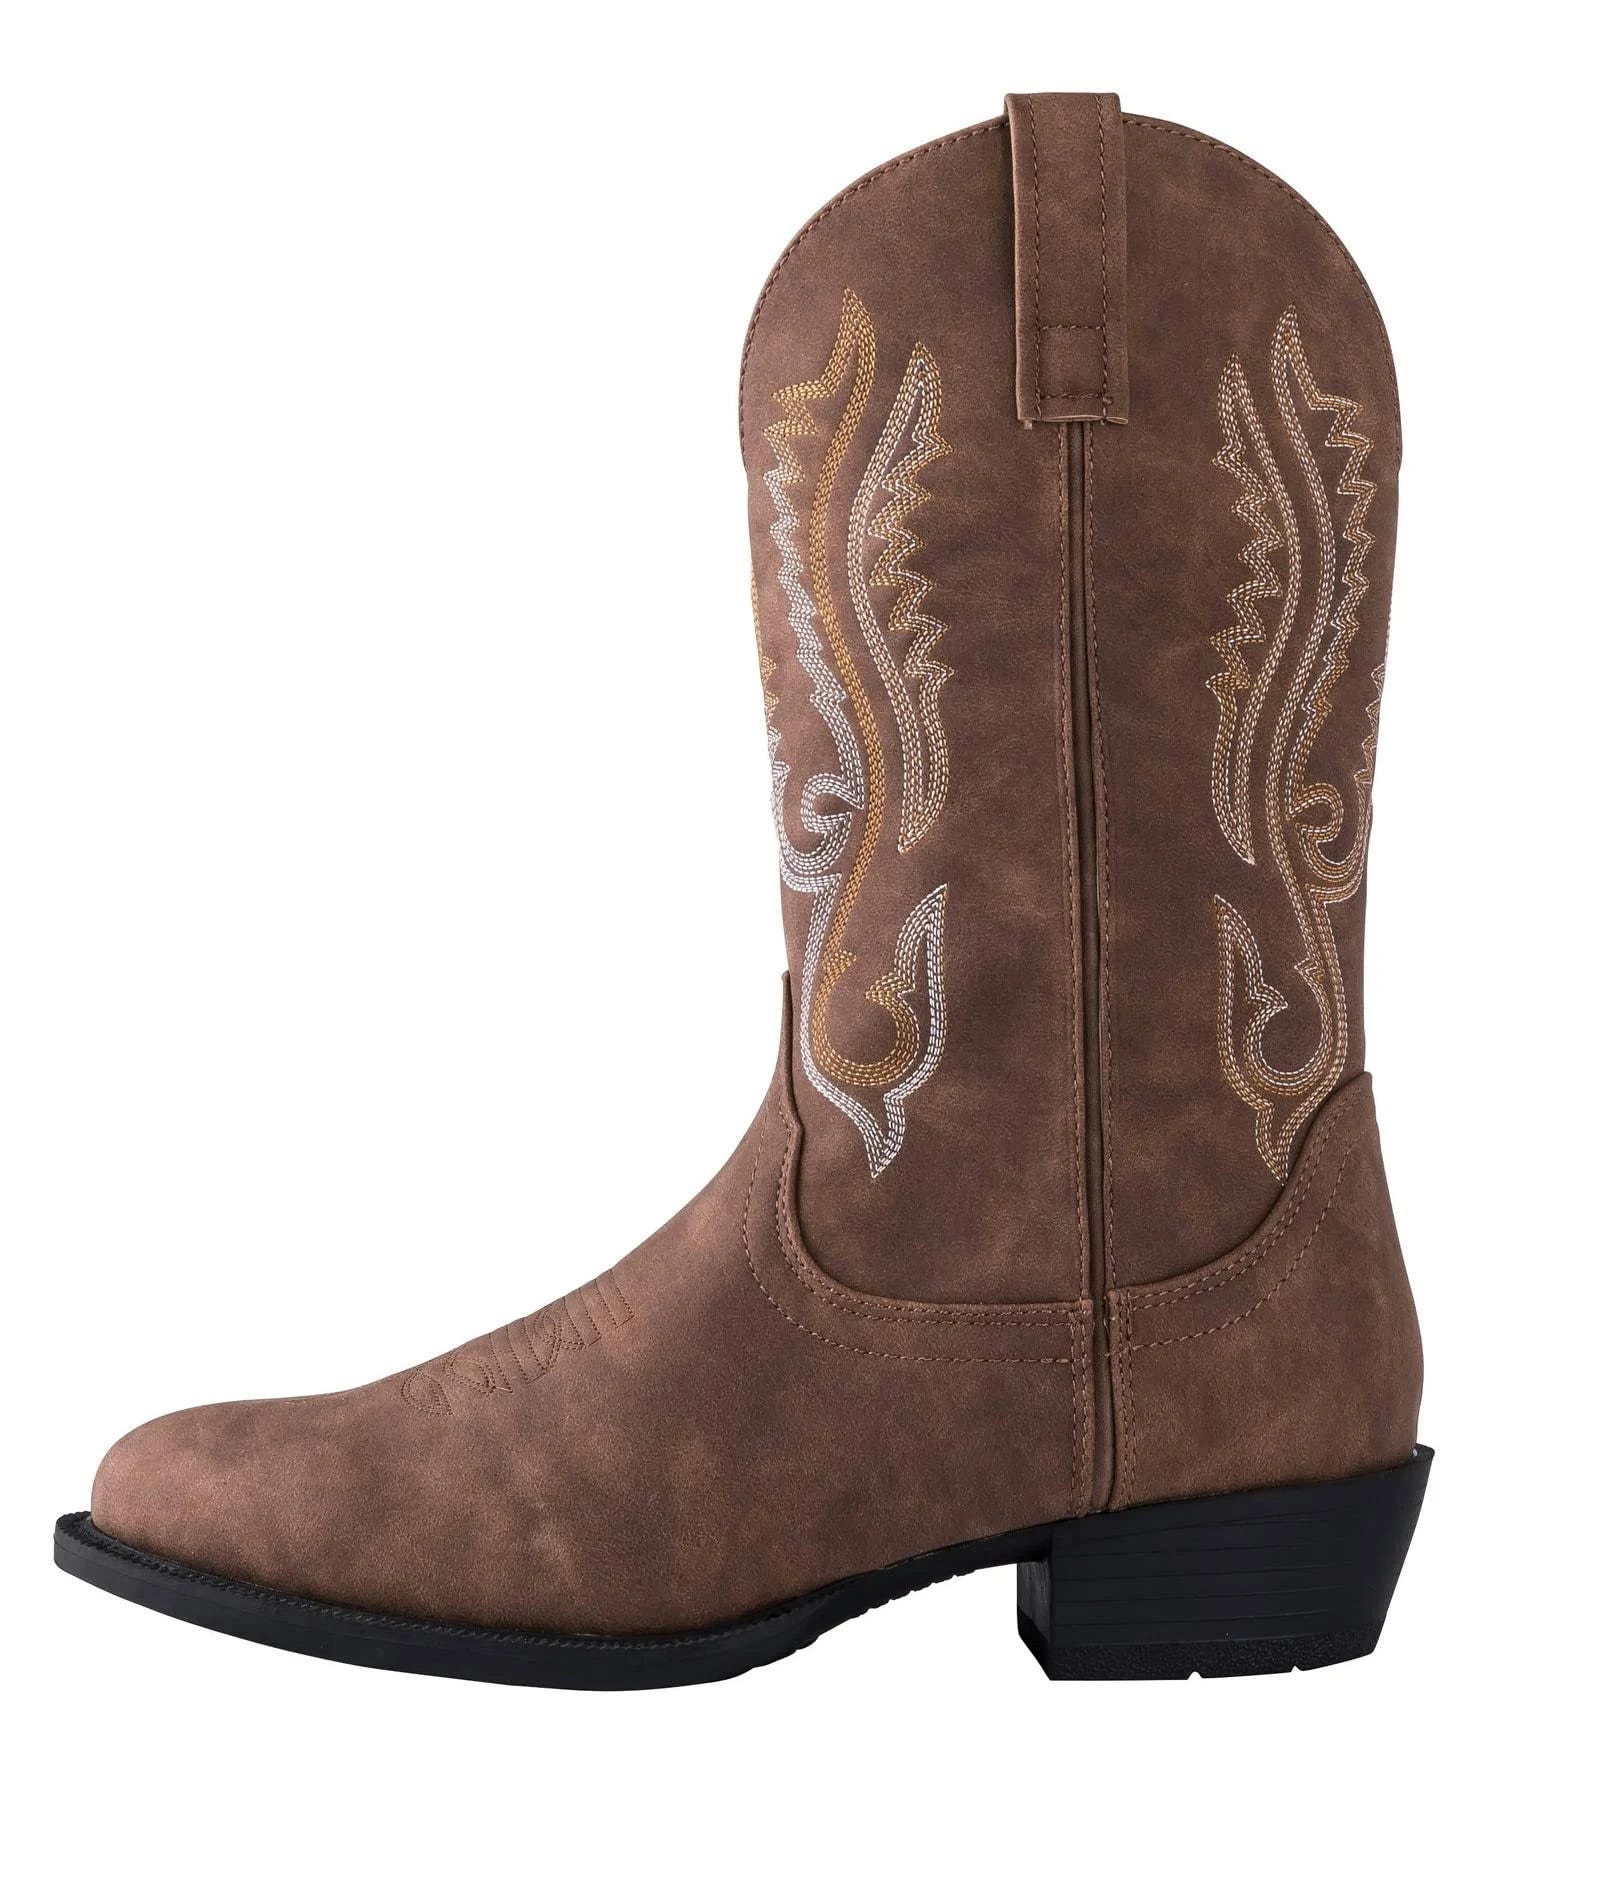 Stylish Men's Classic Round Toe Embroidered Western Cowboy Boots | Image